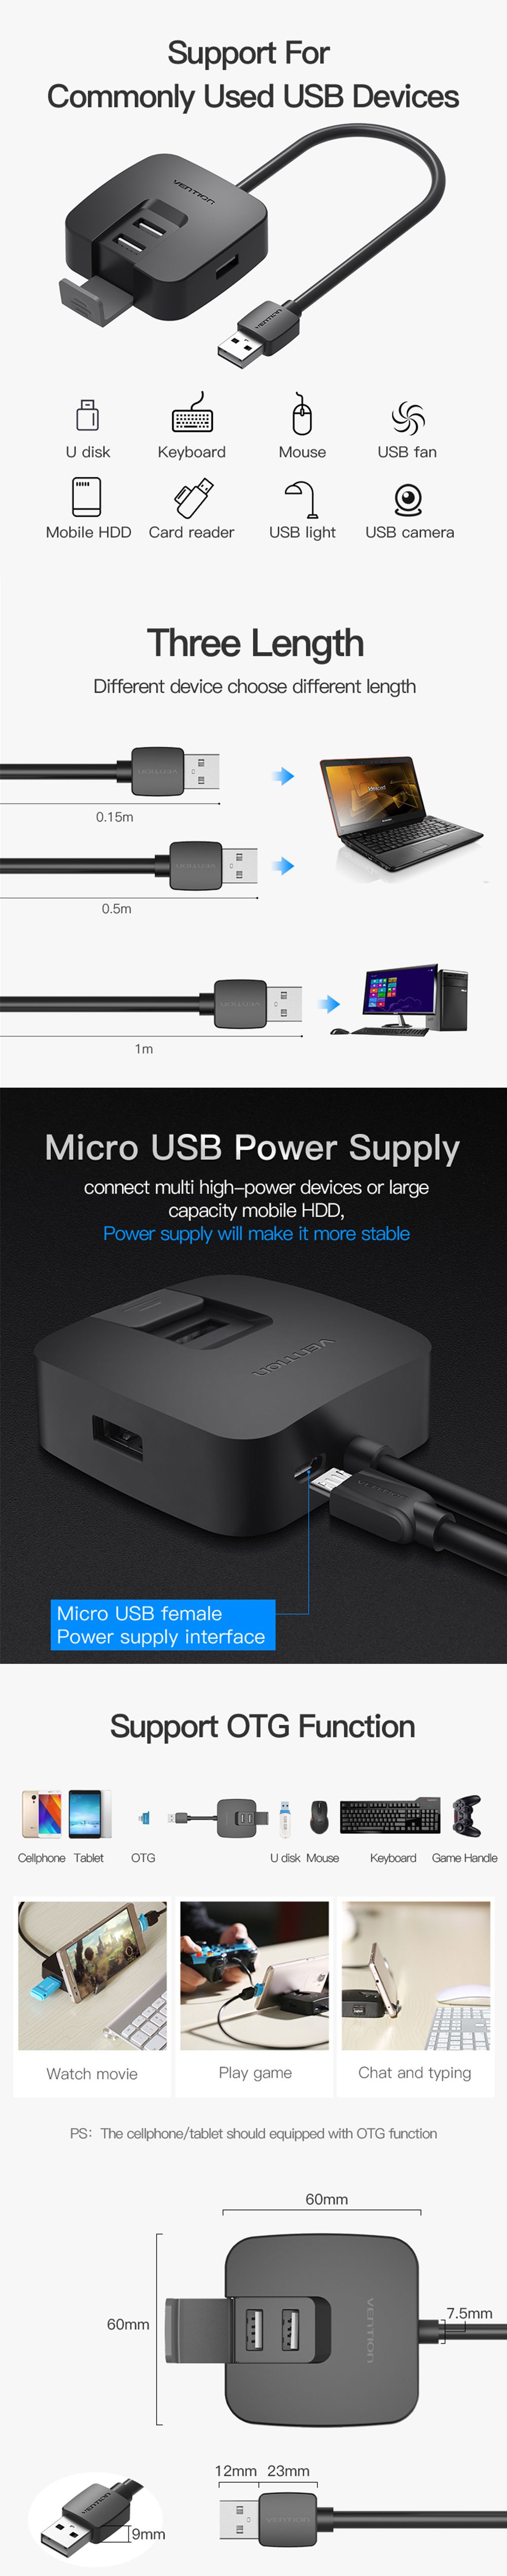 Vetion-USB30-with-4-Ports-USB-Hub-Extender-Connector-Support-OTG-for-Phone-MacBook-Air-1577565